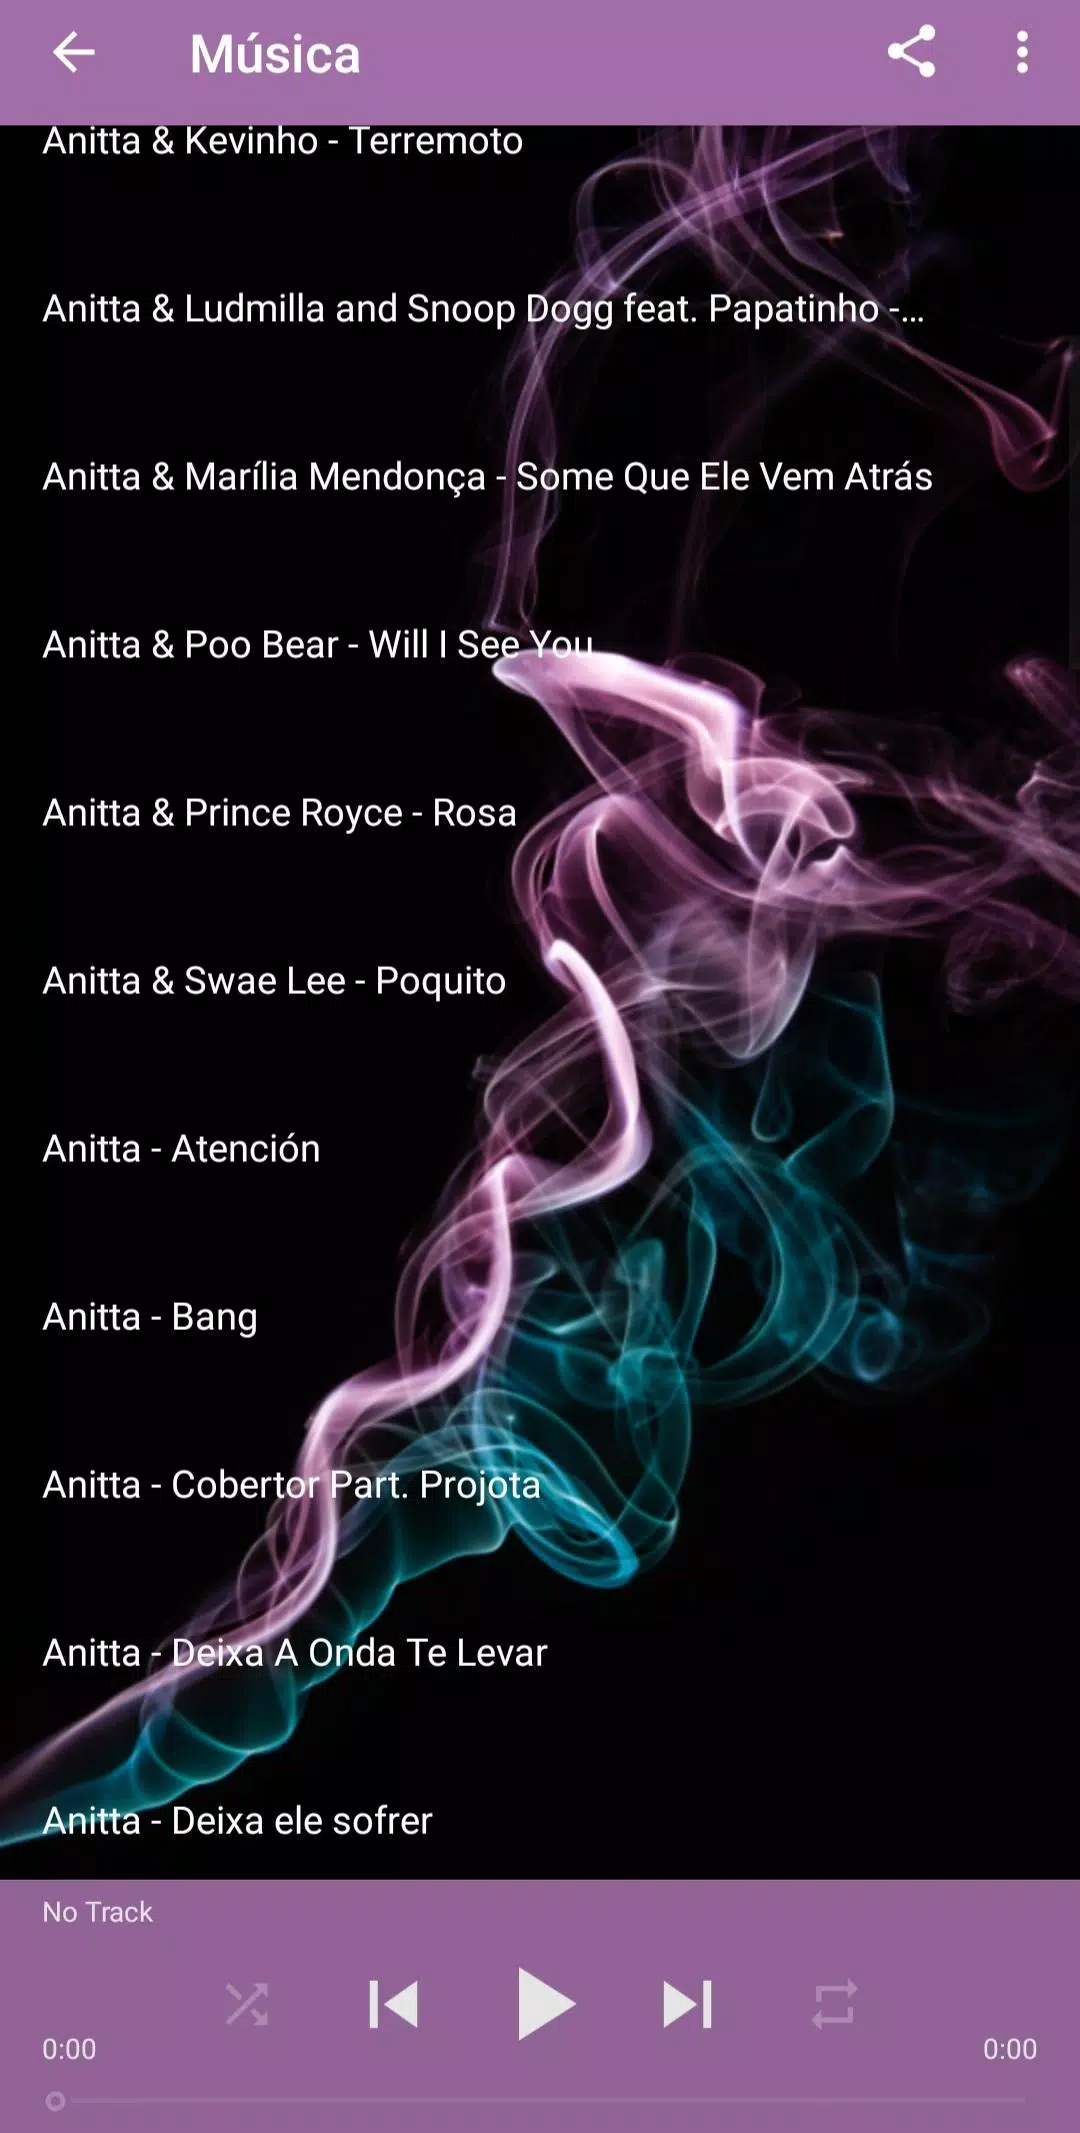 Anitta Musica e Letras for Android - APK Download